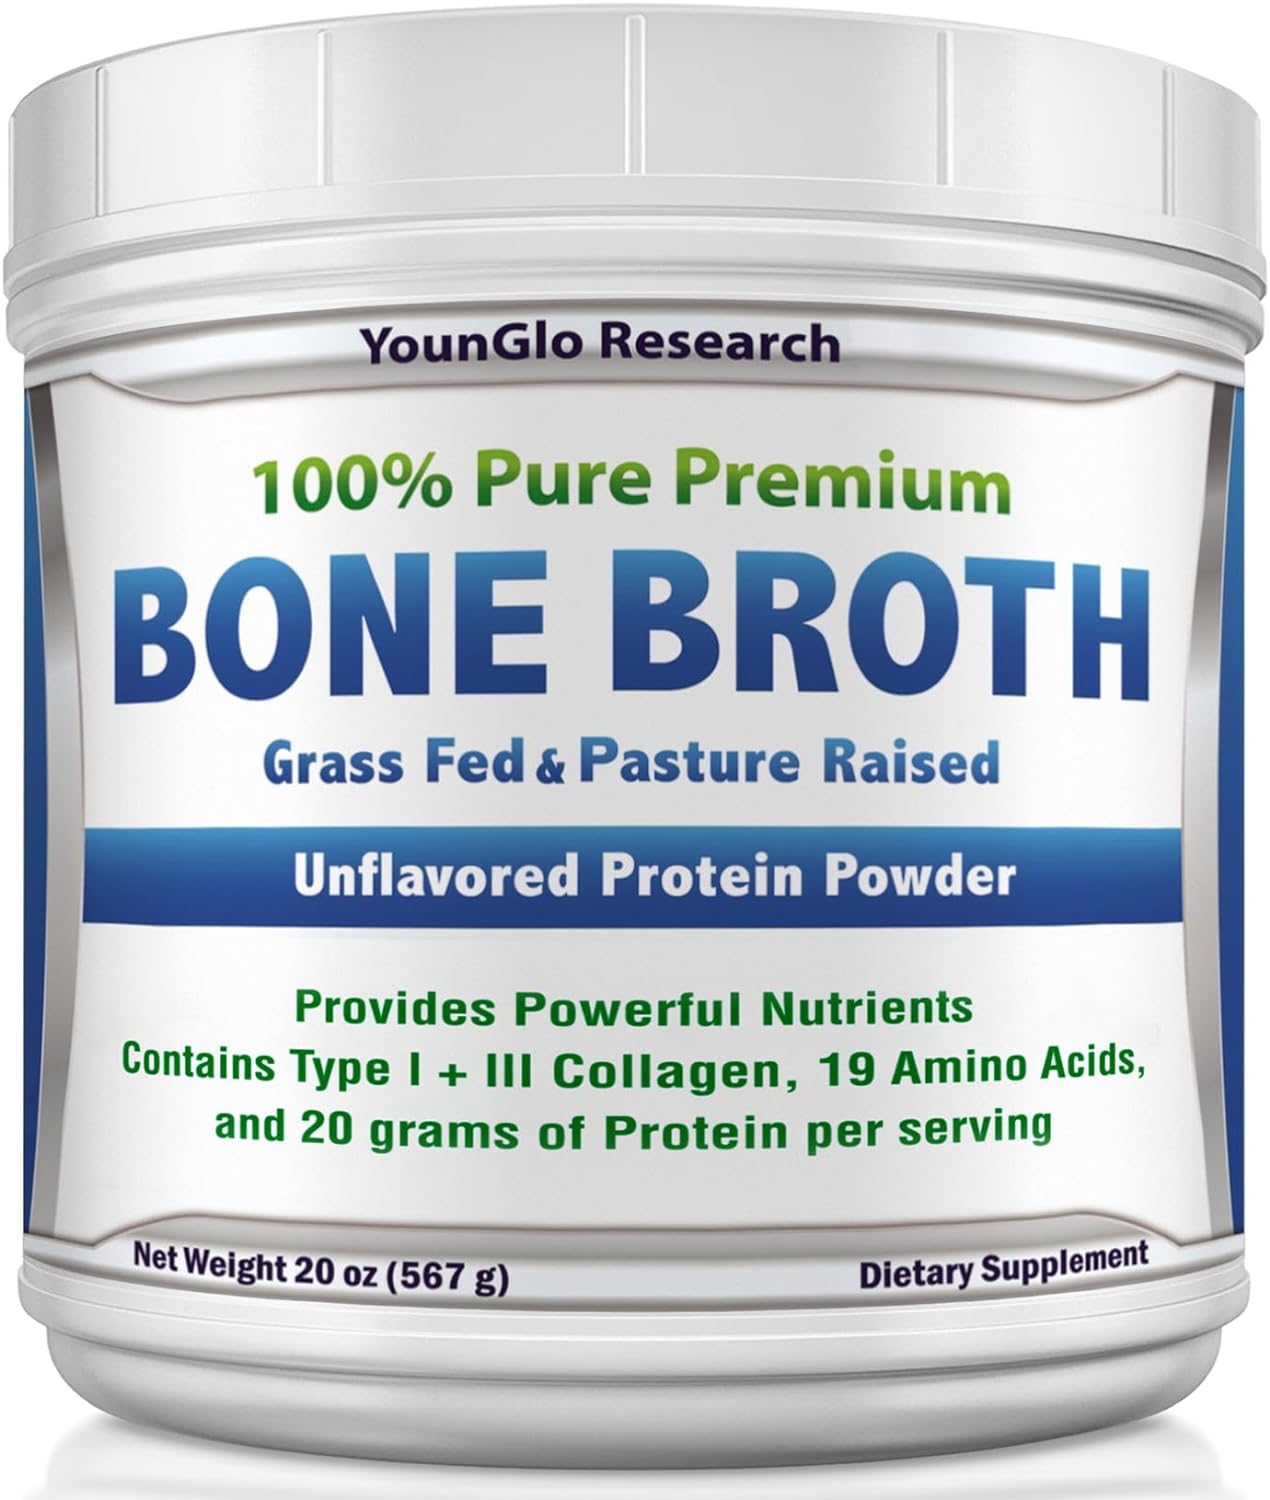 YounGlo-Research-Bone-Broth-Beef-Protein-316